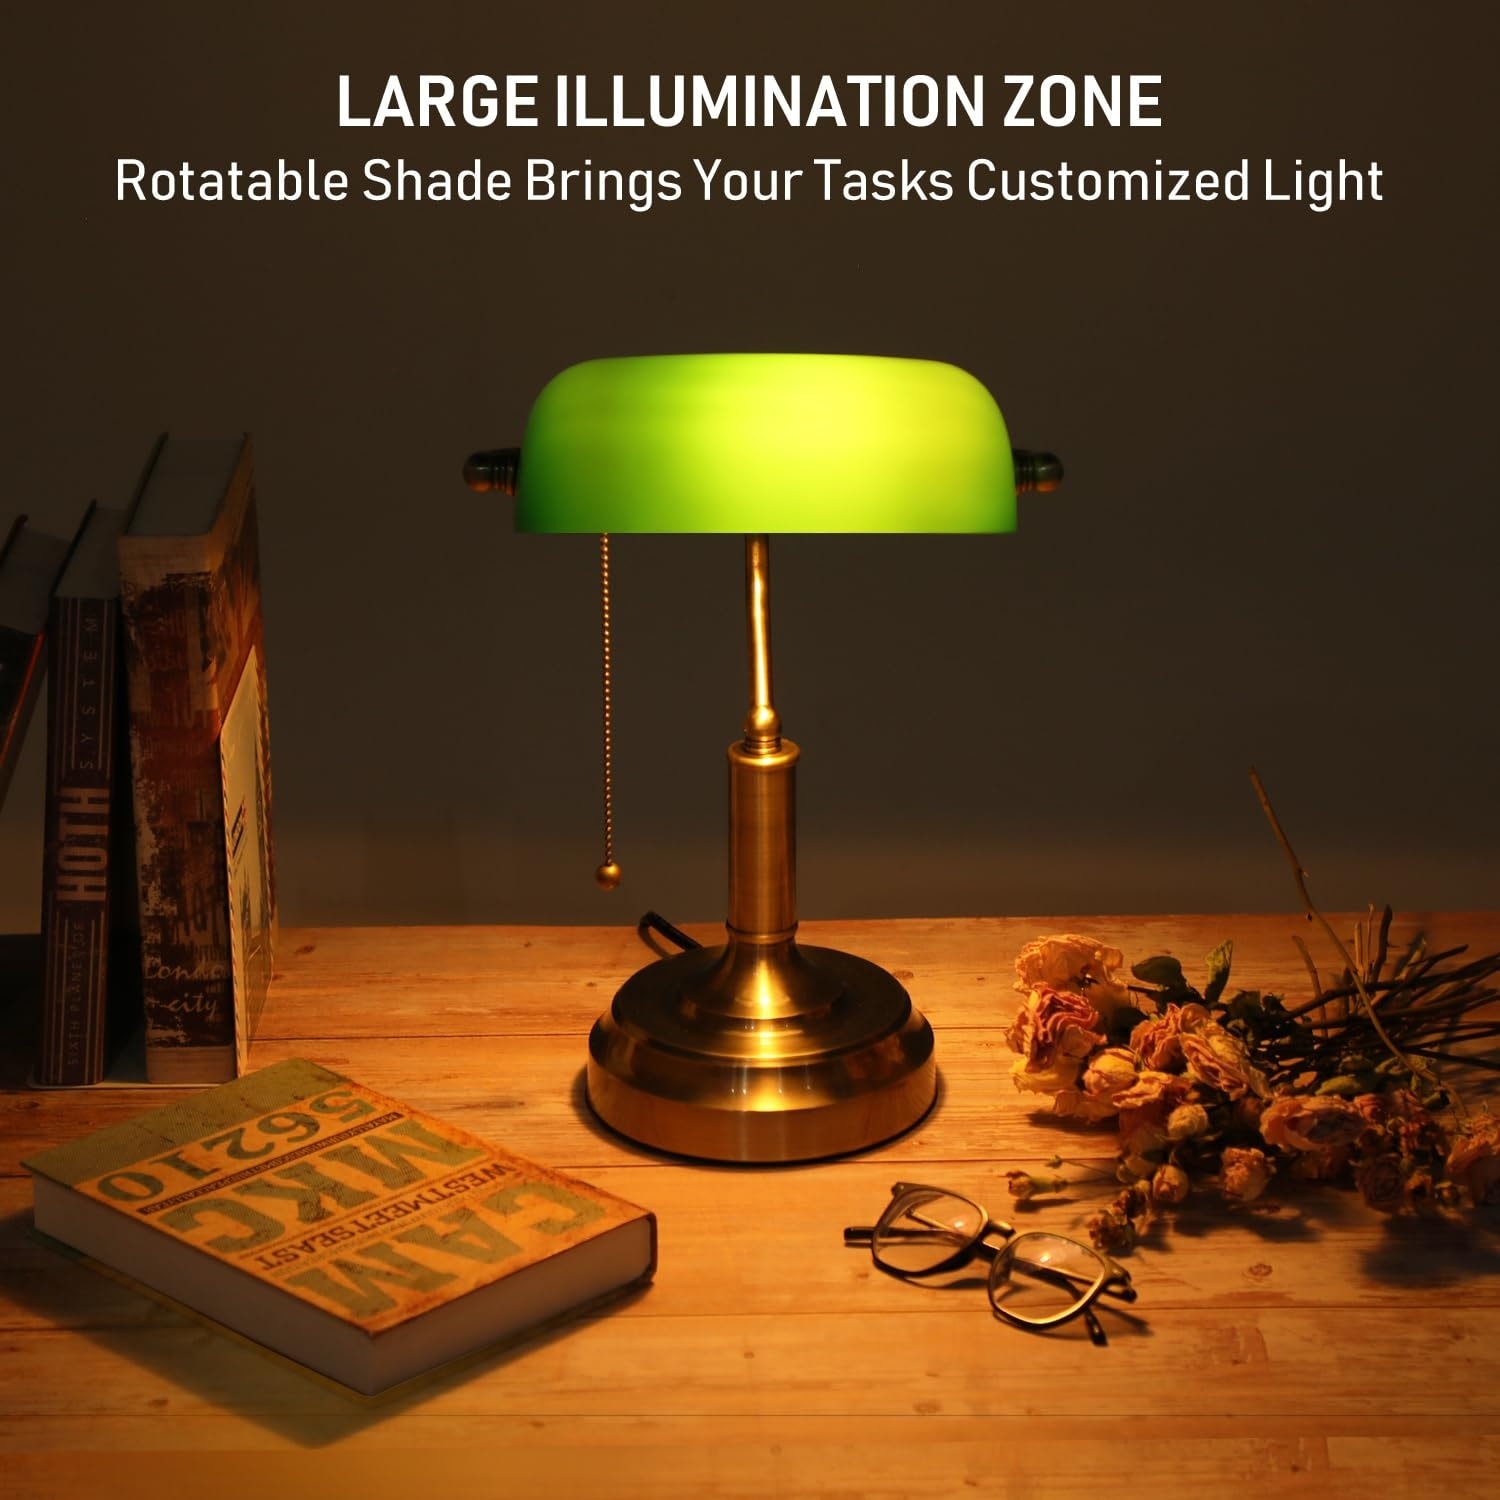 https://ak1.ostkcdn.com/images/products/is/images/direct/8cb3b5e0bbb0a4b86e5becd6412d927e62c79260/Green-Glass-Bankers-Desk-Lamp%2C-UL-Listed%2C-Antique-Desk-Lamps-with-Brass-Base%2C-Traditional-Library-Lamp-with-Pull-Chain%2C-E26-Base.jpg